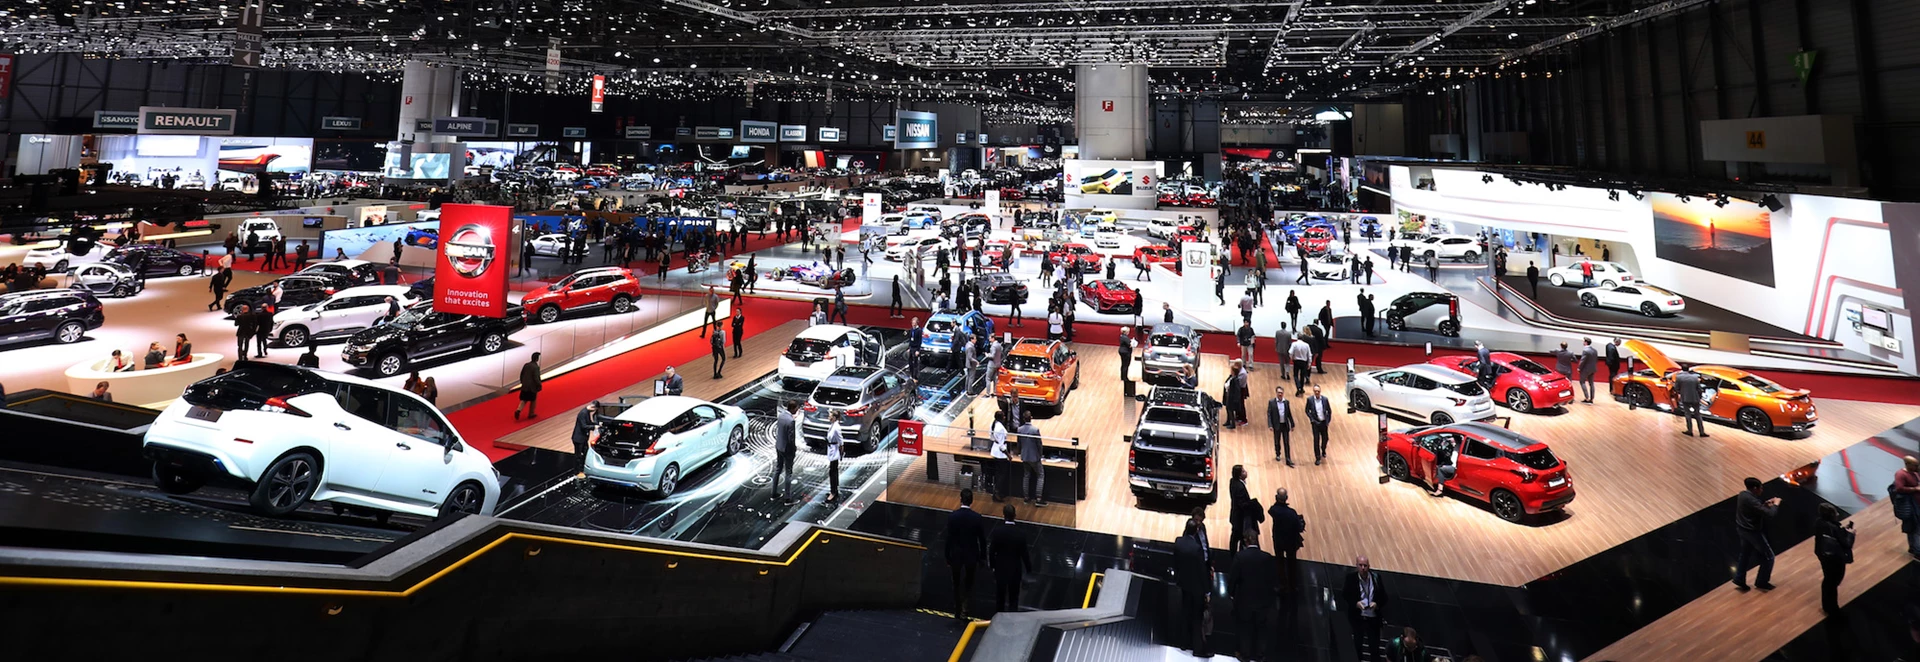 10 things we learned from the 2018 Geneva Motor Show